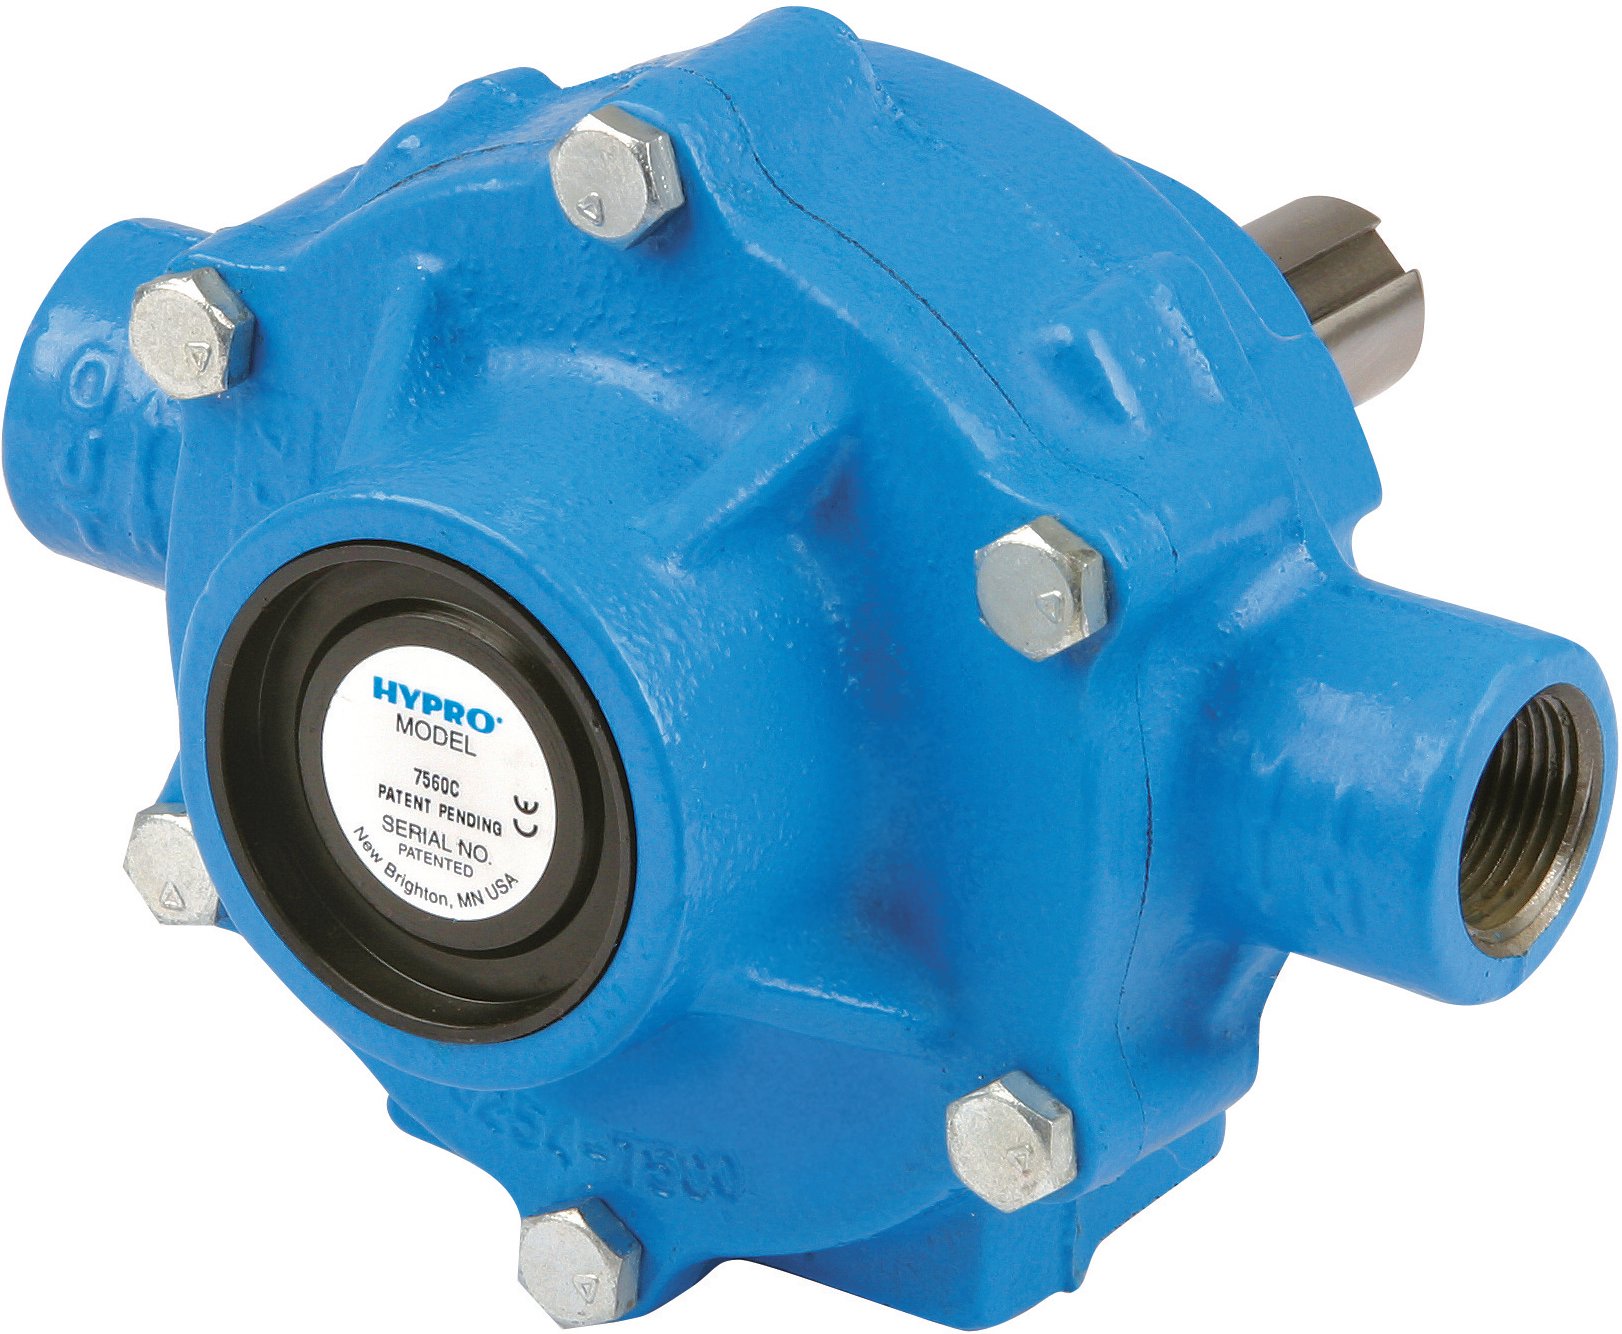 Hypro 7560 Series - 8 Roller, Cast Iron, Ni-Resist or Silver Series XL Roller Pumps